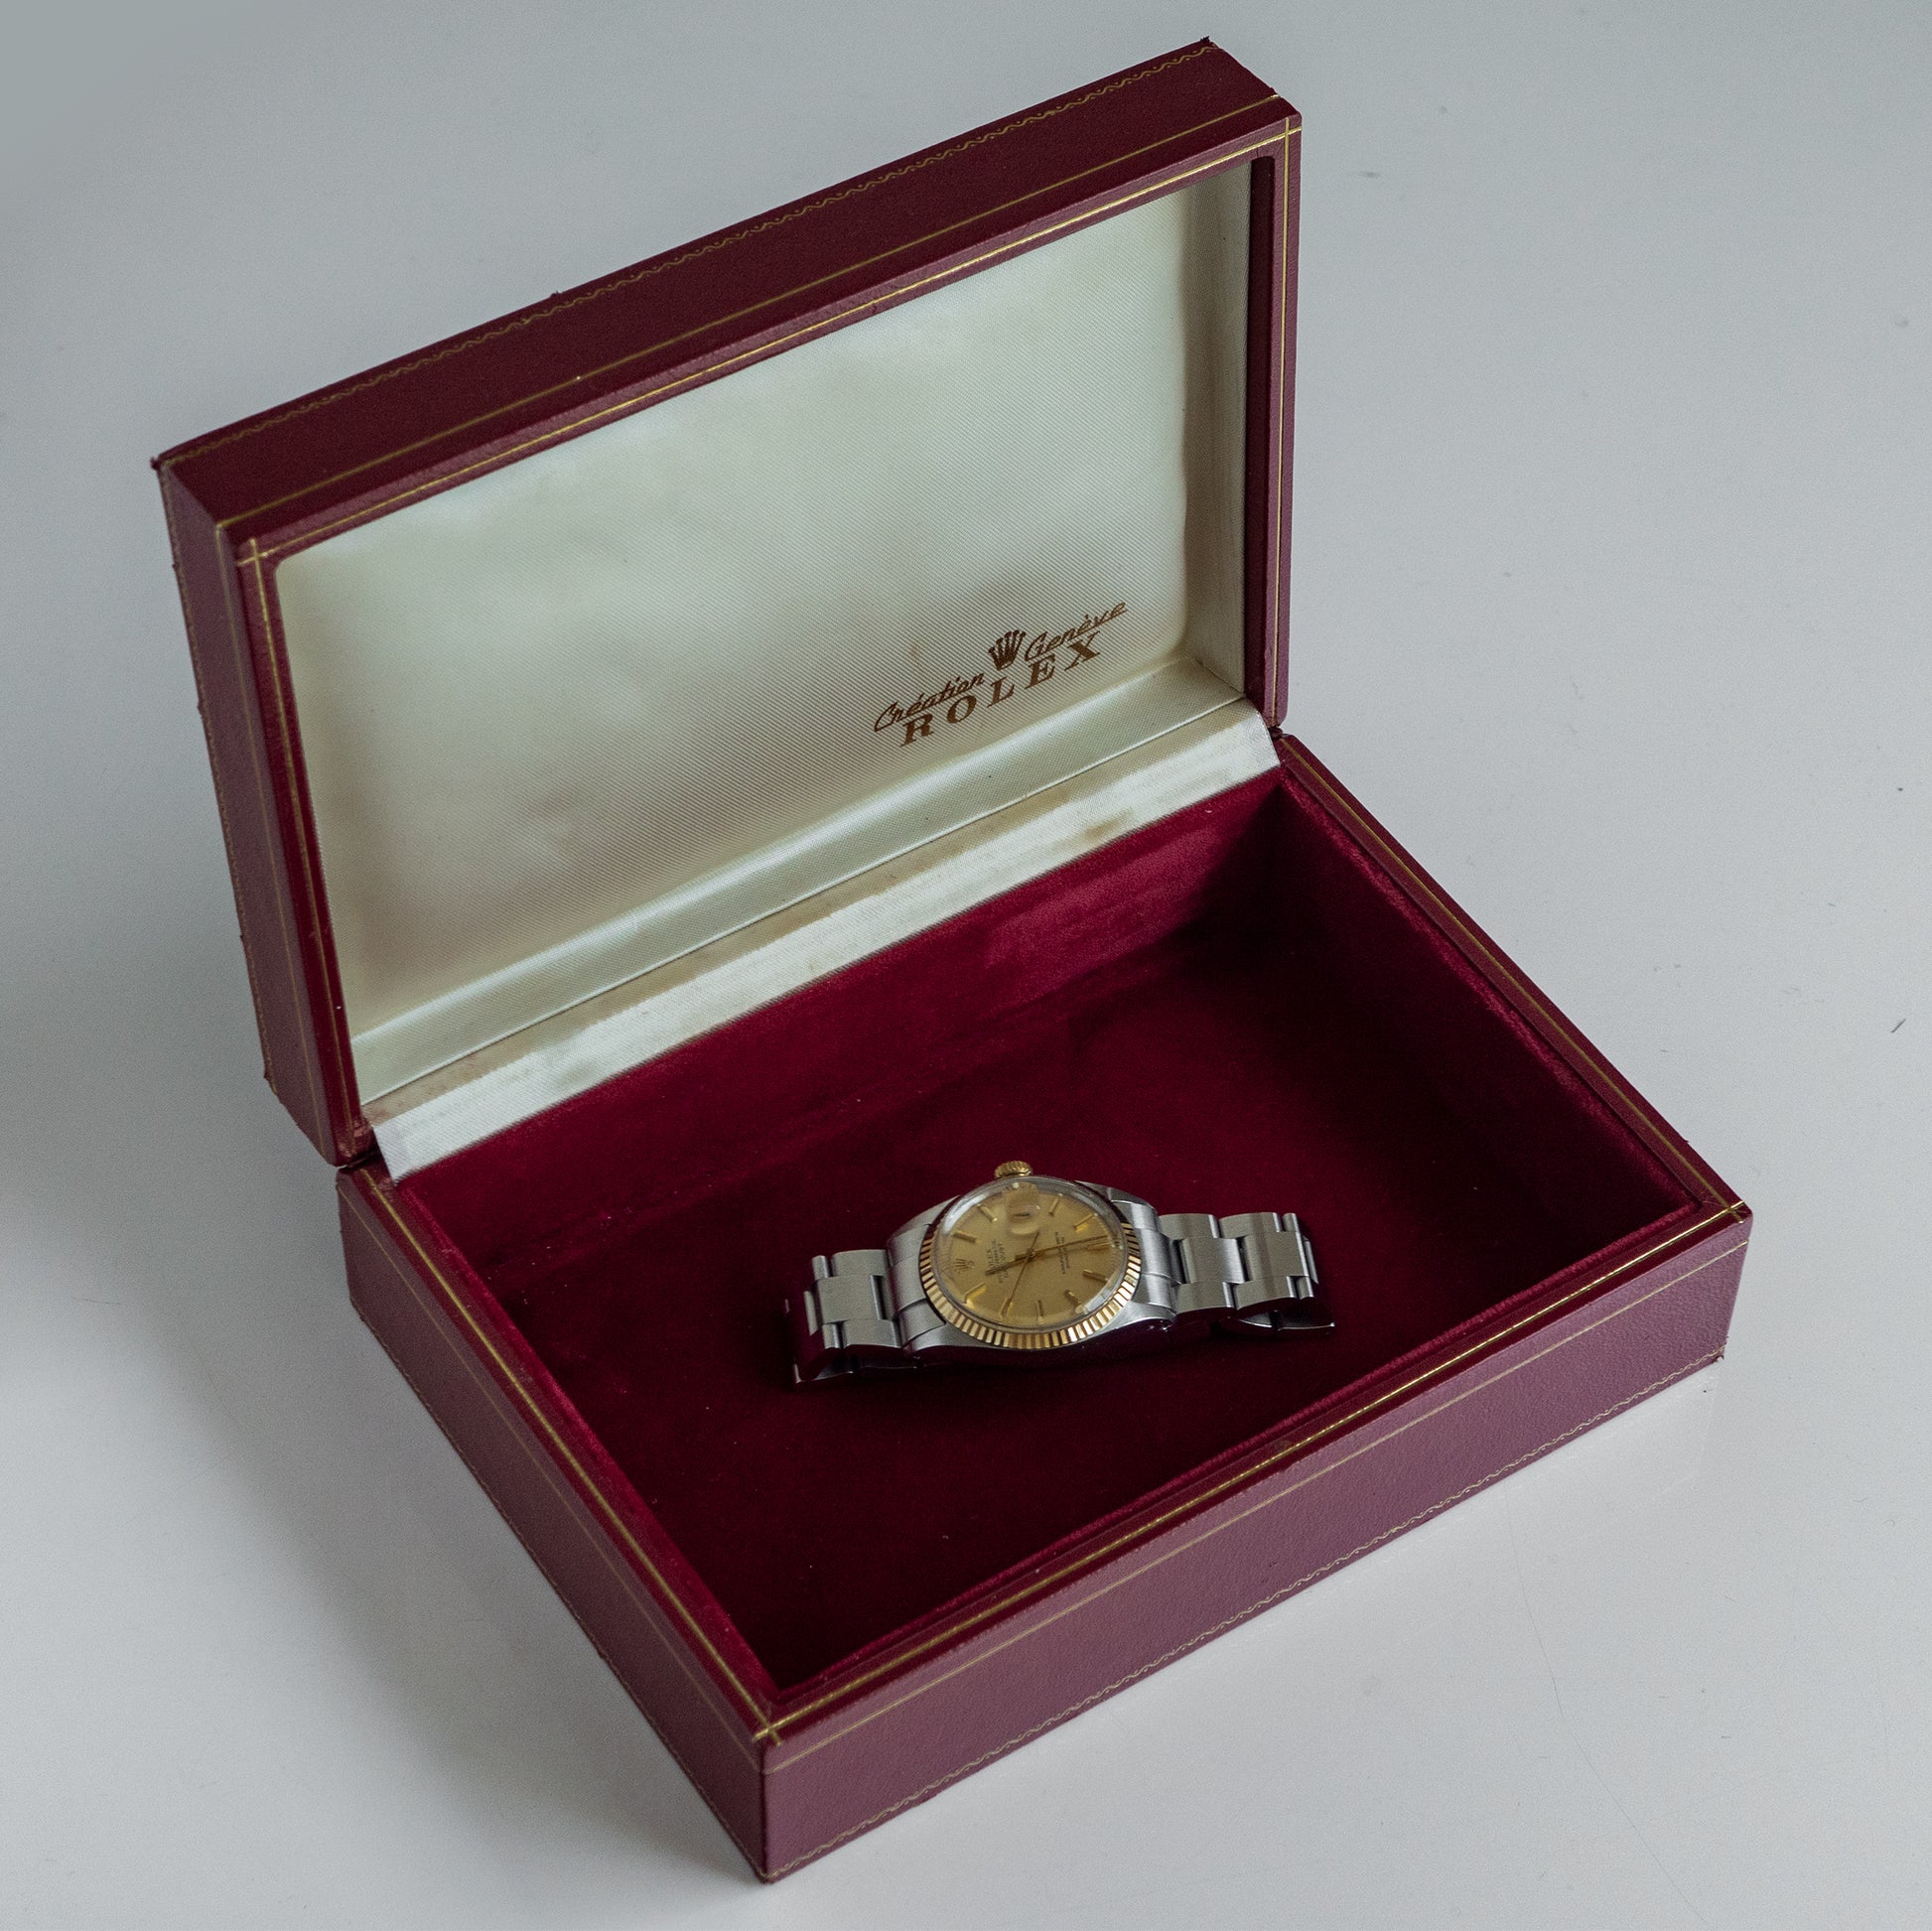 No. 325 / Rolex Watch Box - 1970s – From Time To Times